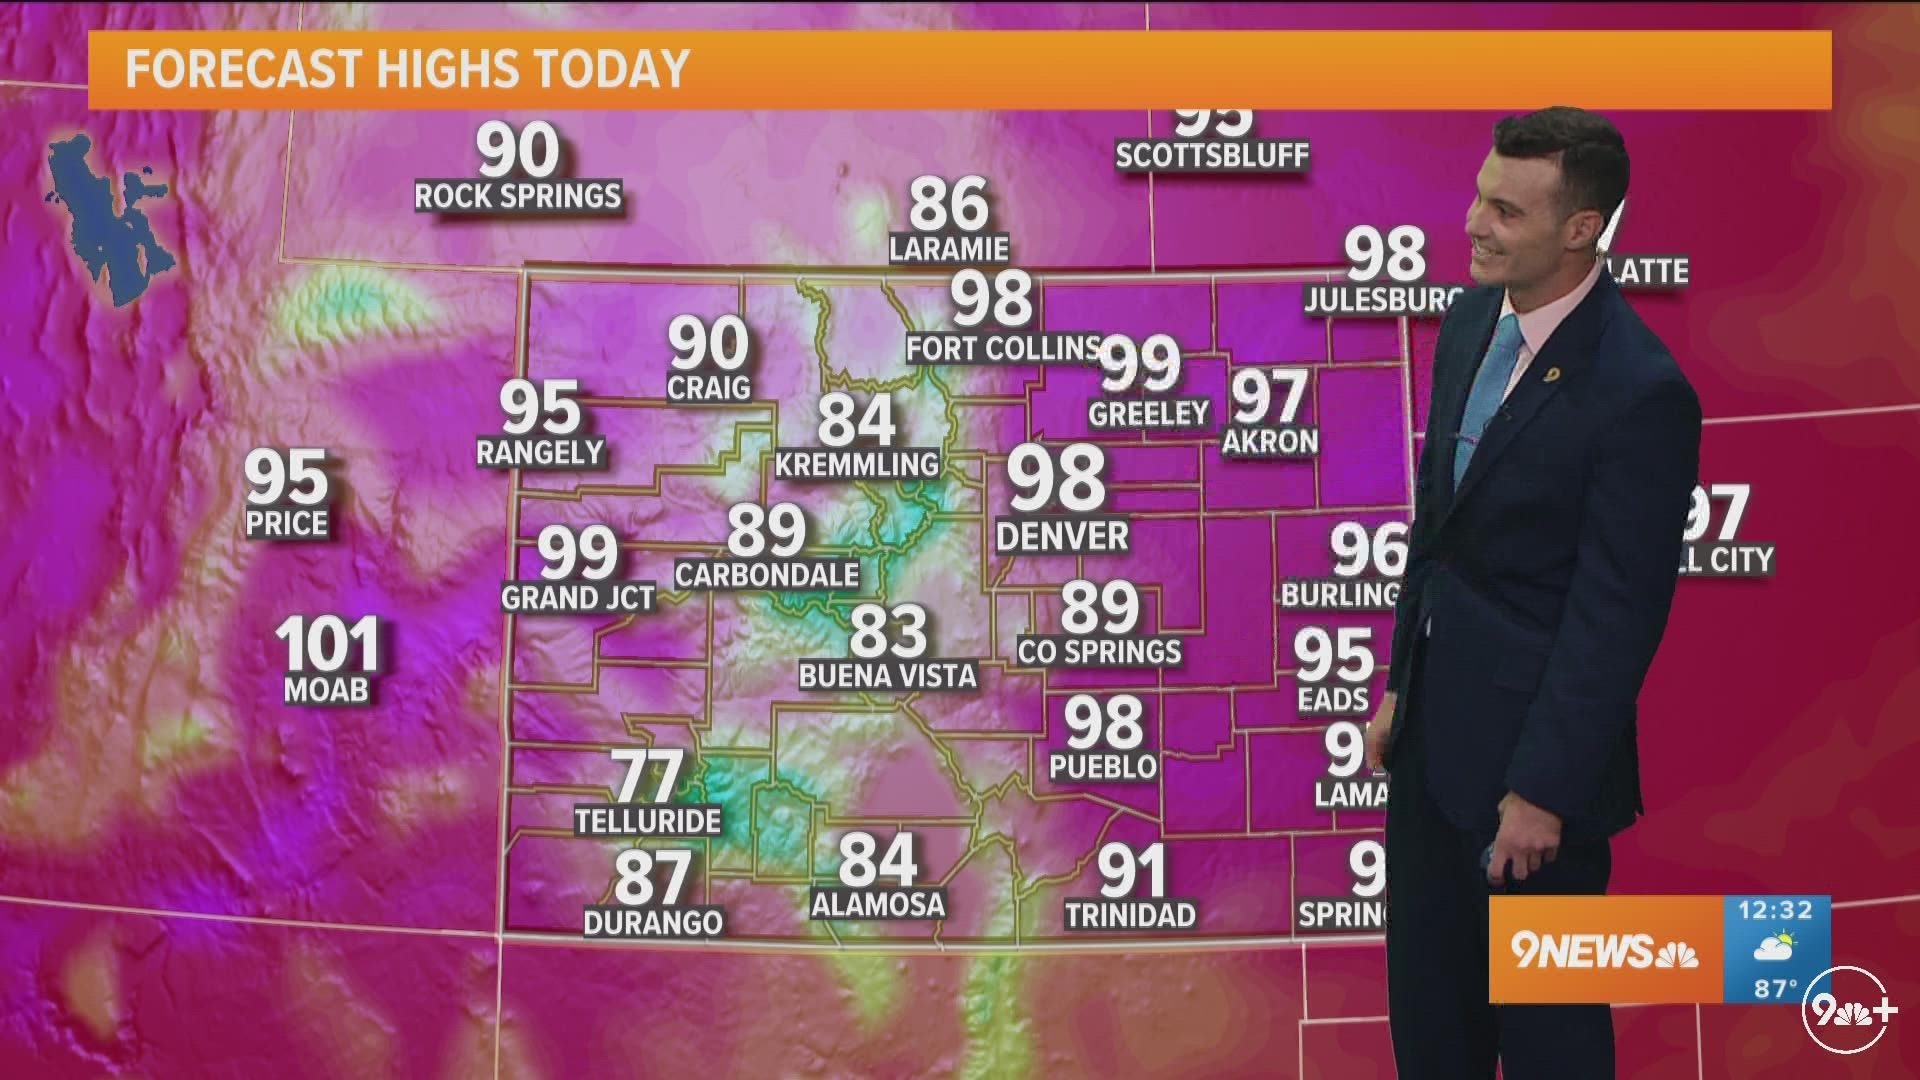 9NEWS Meteorologist Greg Perez has an in-depth look at Colorado's forecast.